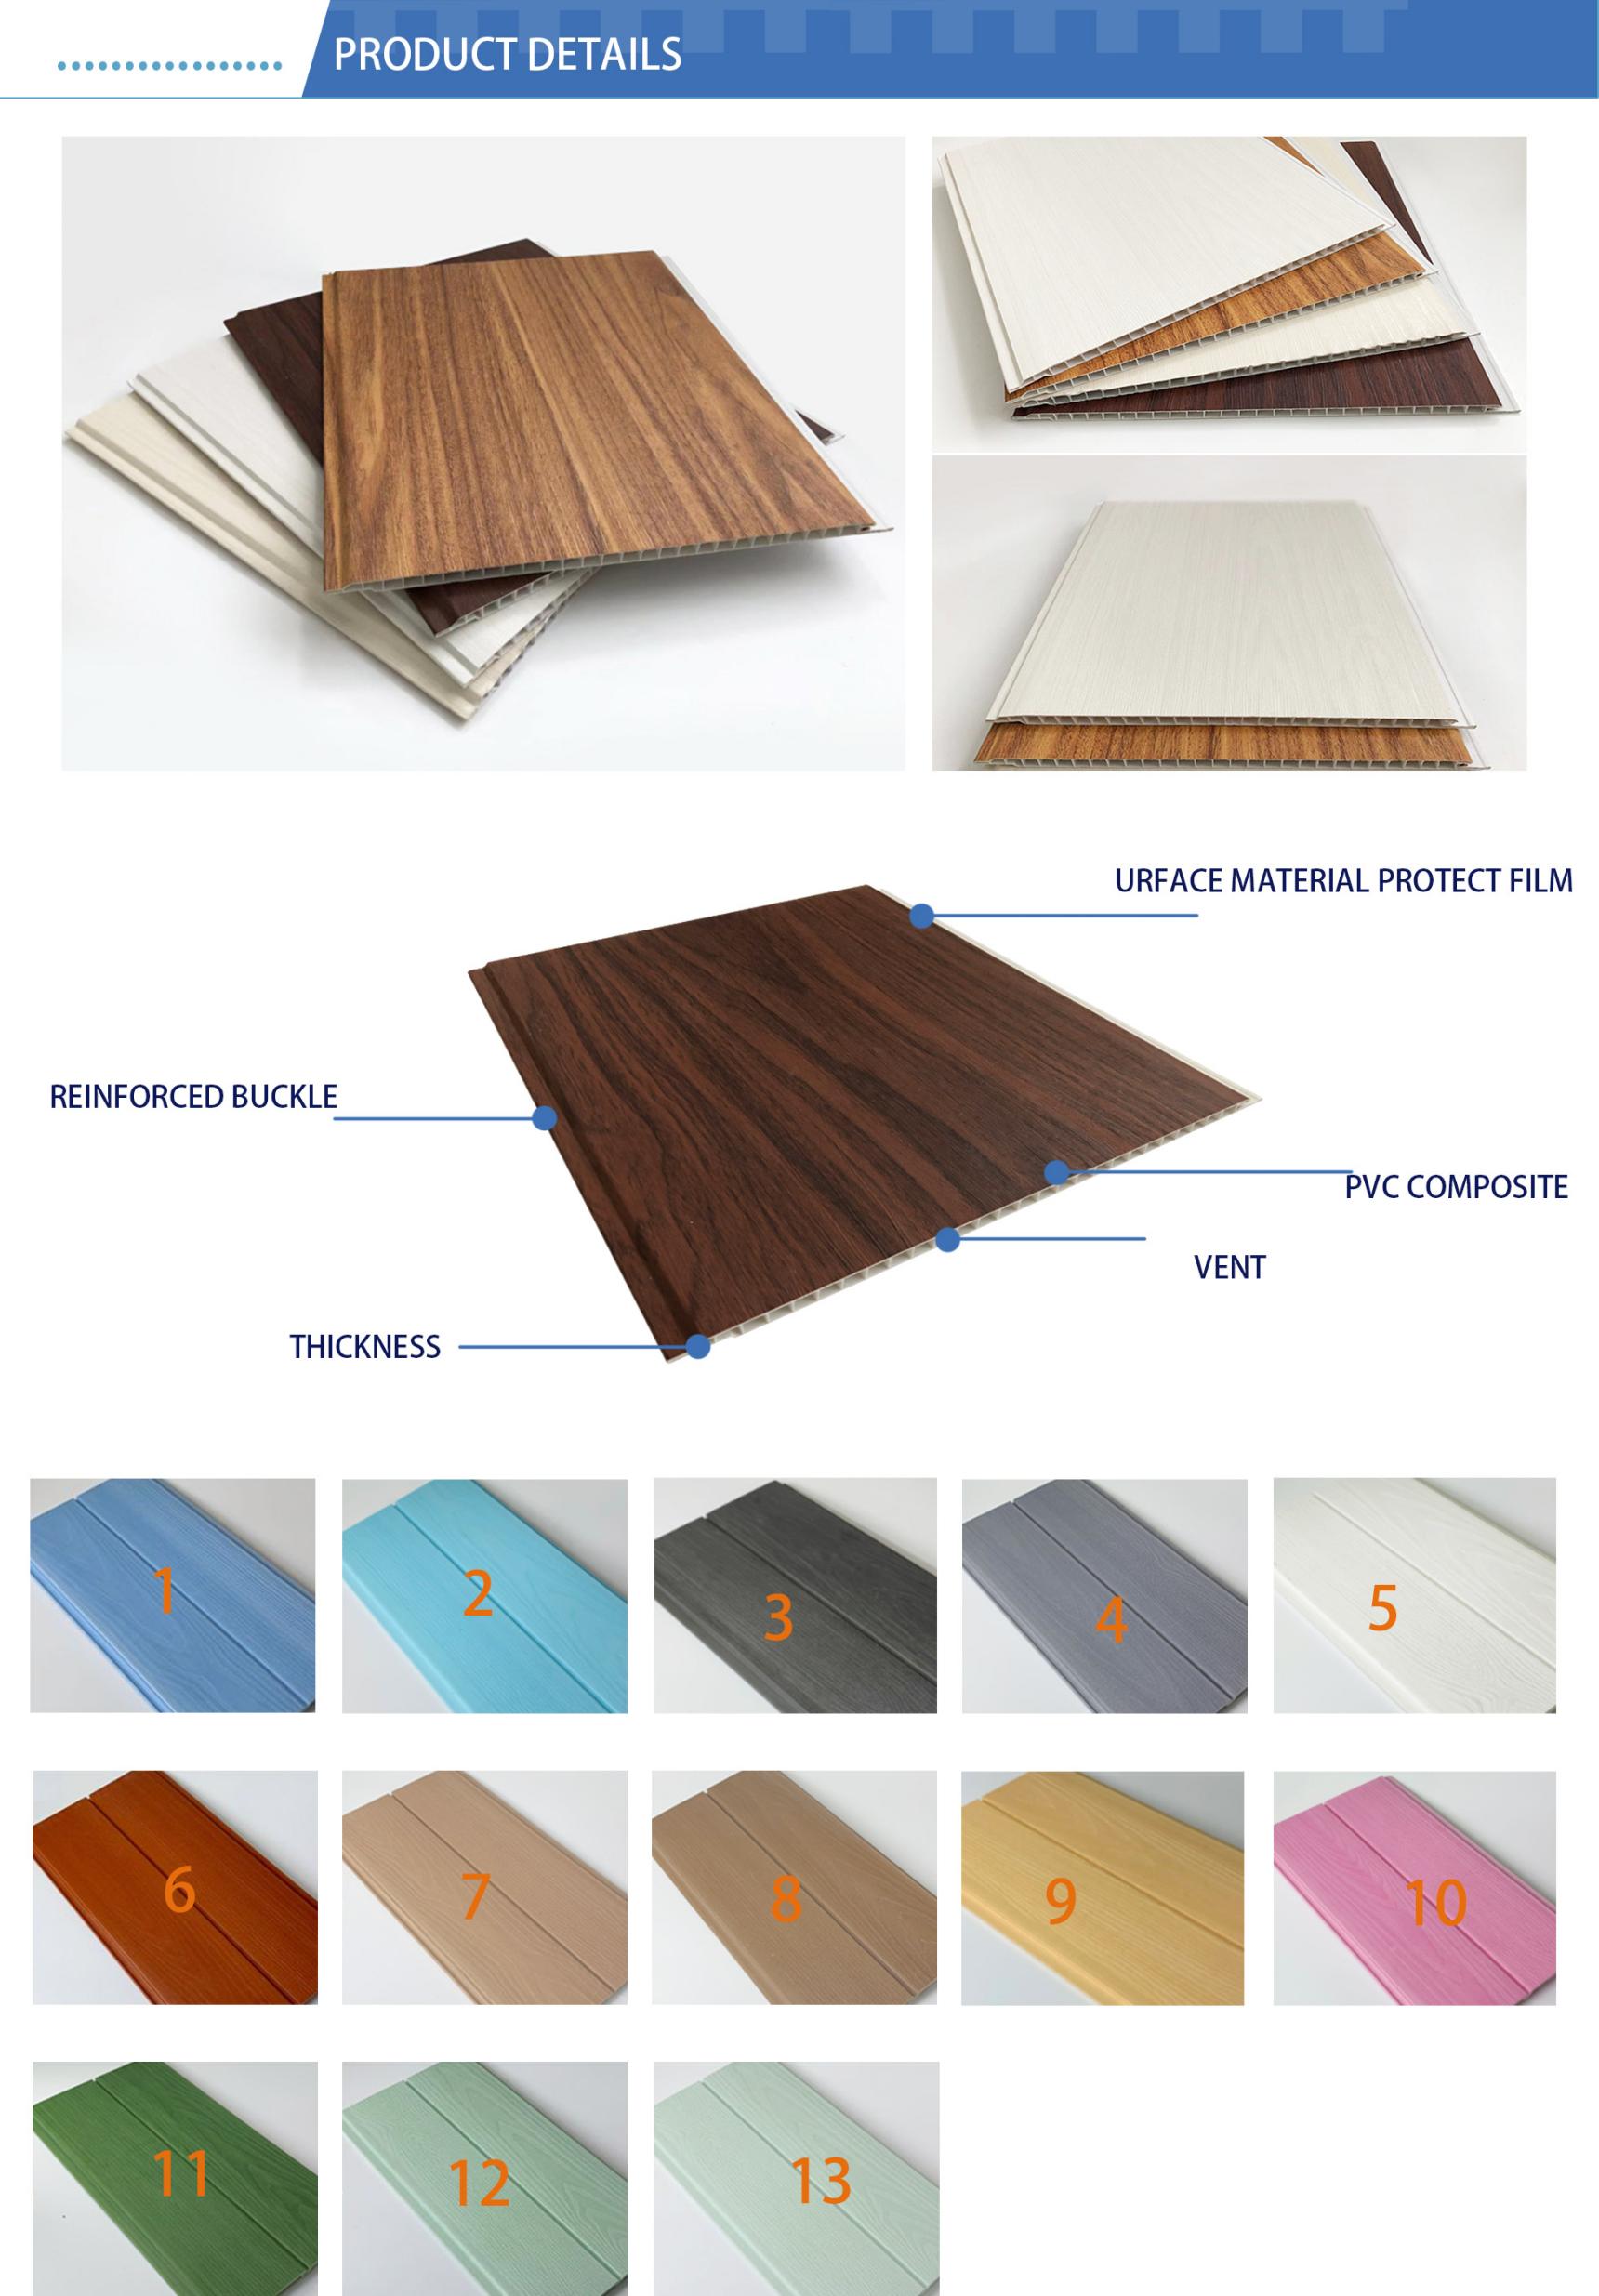 Top supplier laminated plastic fireproof interior pvc wall panels office ceiling tiles plastic ceiling panels pvc manufacturers